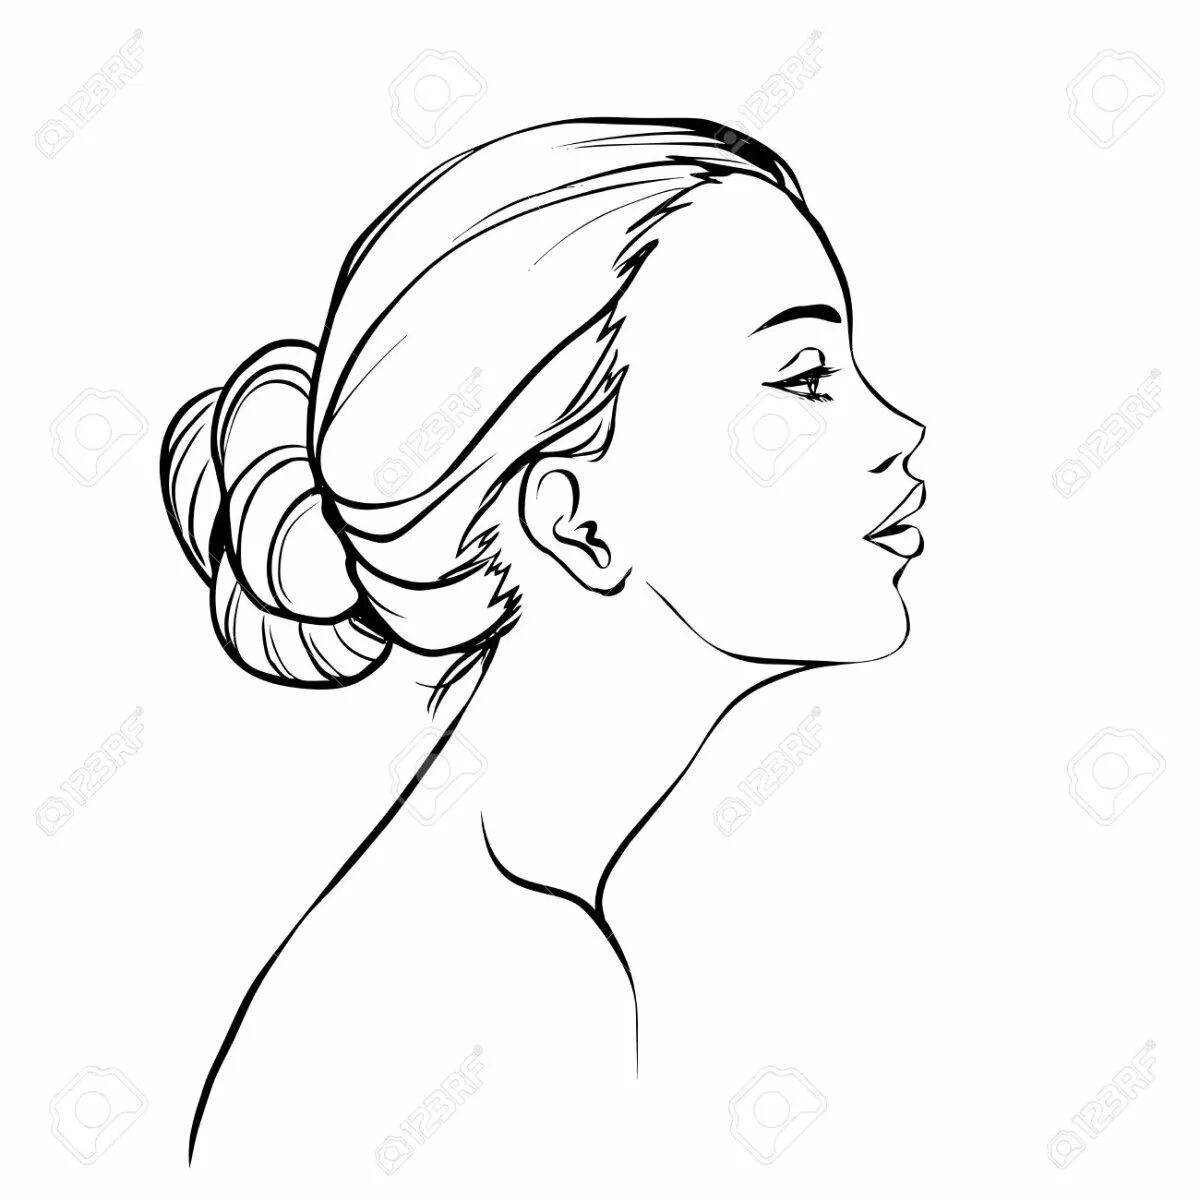 Glowing face profile coloring page